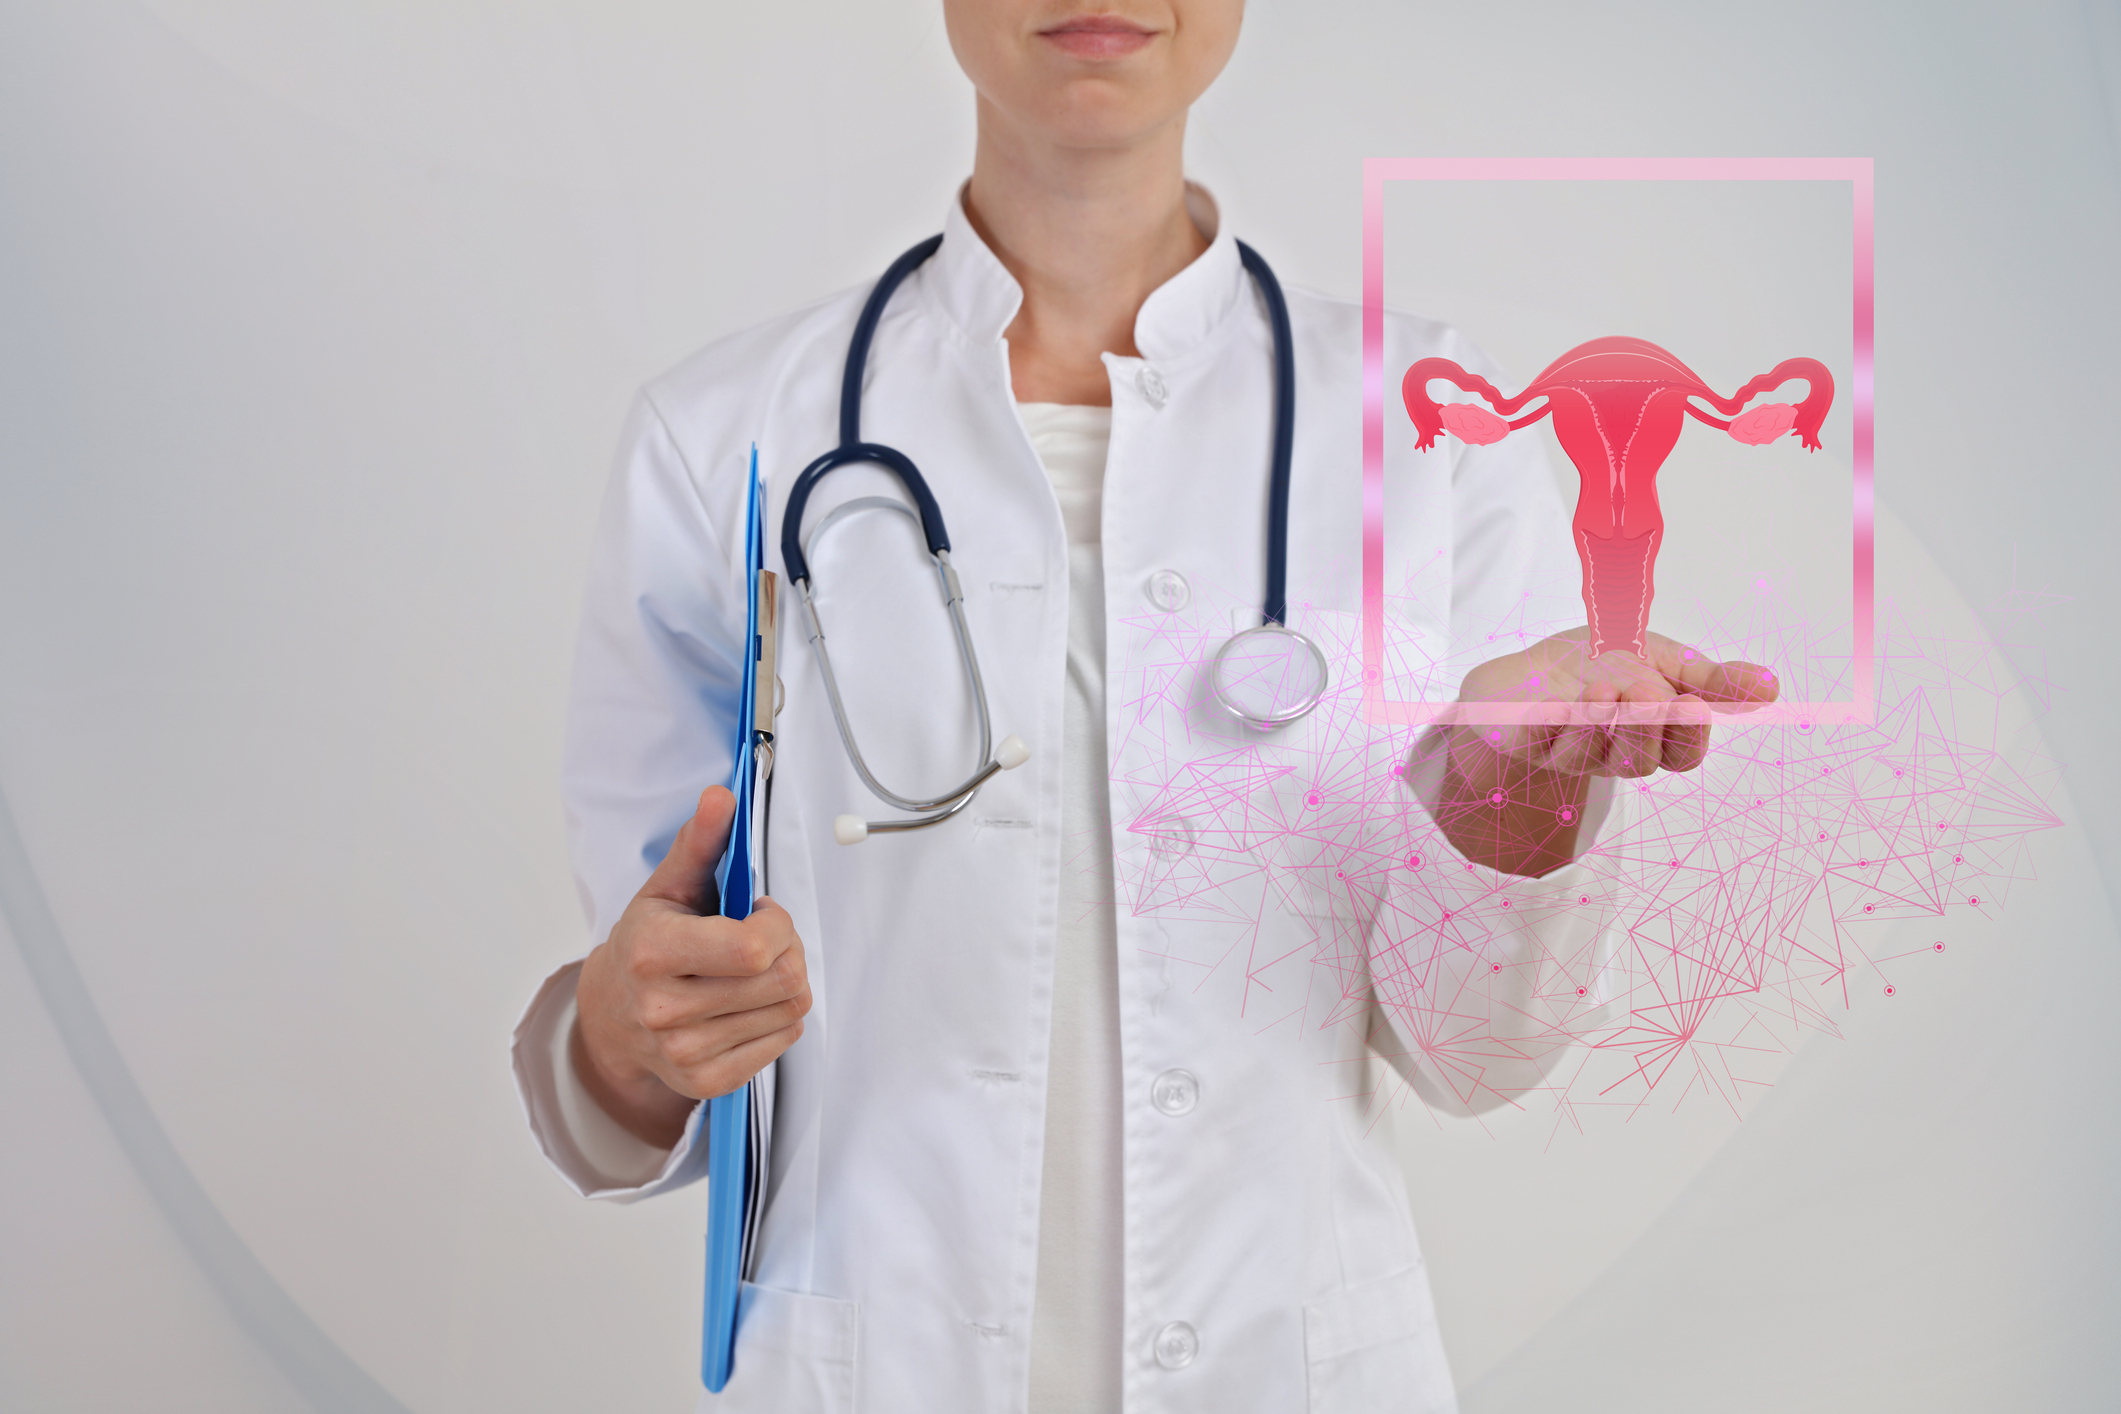 Gynecology , female healthprevention and modern technologies of diagnostics concept